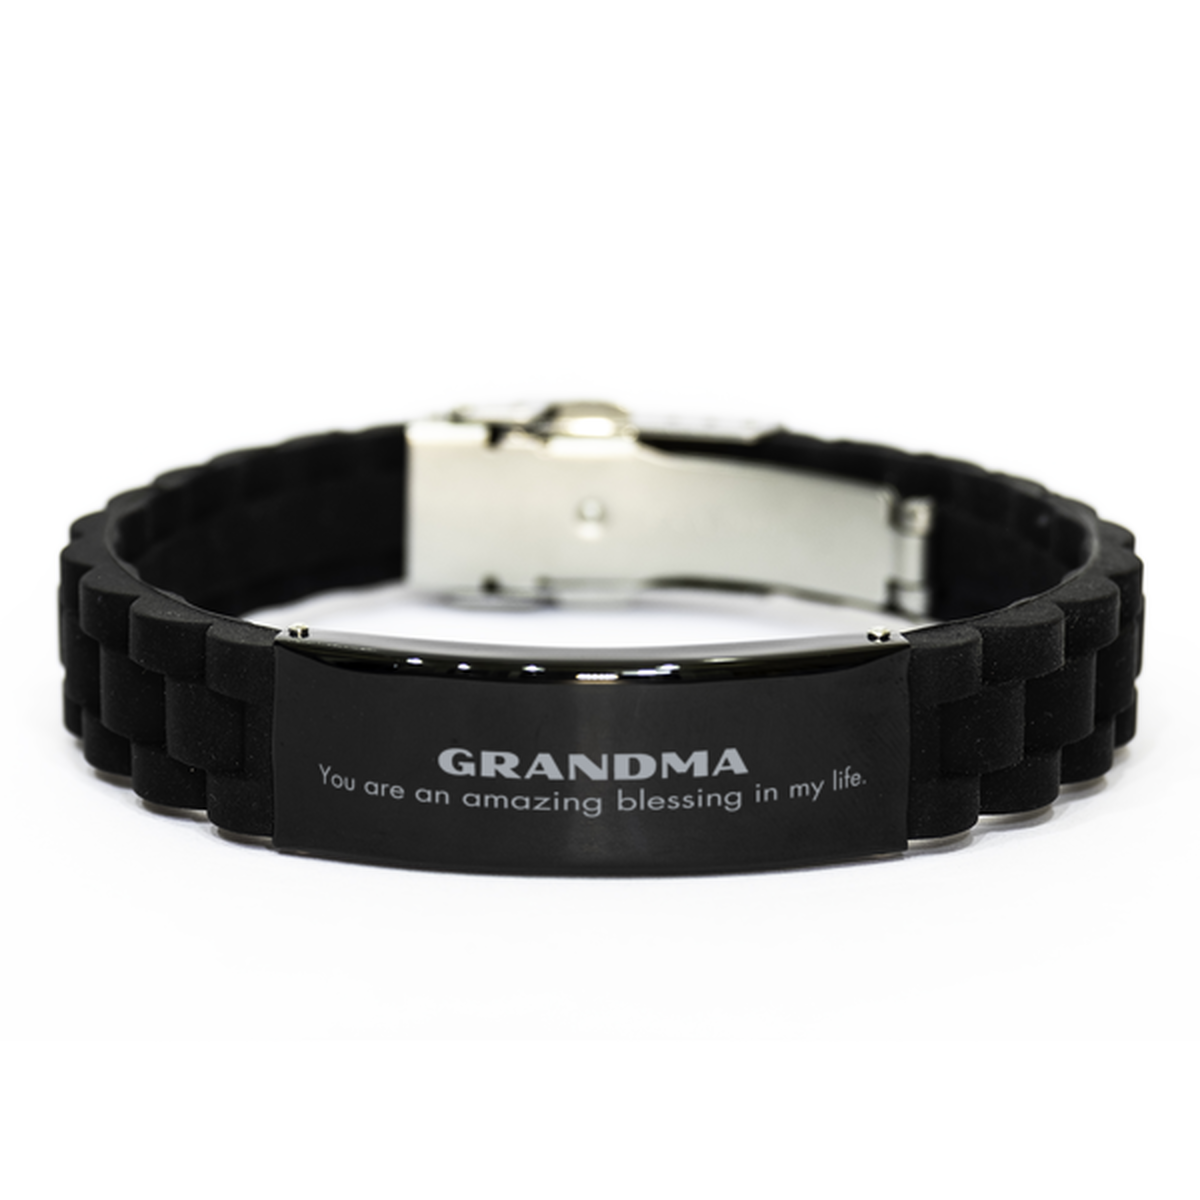 Grandma Black Glidelock Clasp Bracelet, You are an amazing blessing in my life, Thank You Gifts For Grandma, Inspirational Birthday Christmas Unique Gifts For Grandma